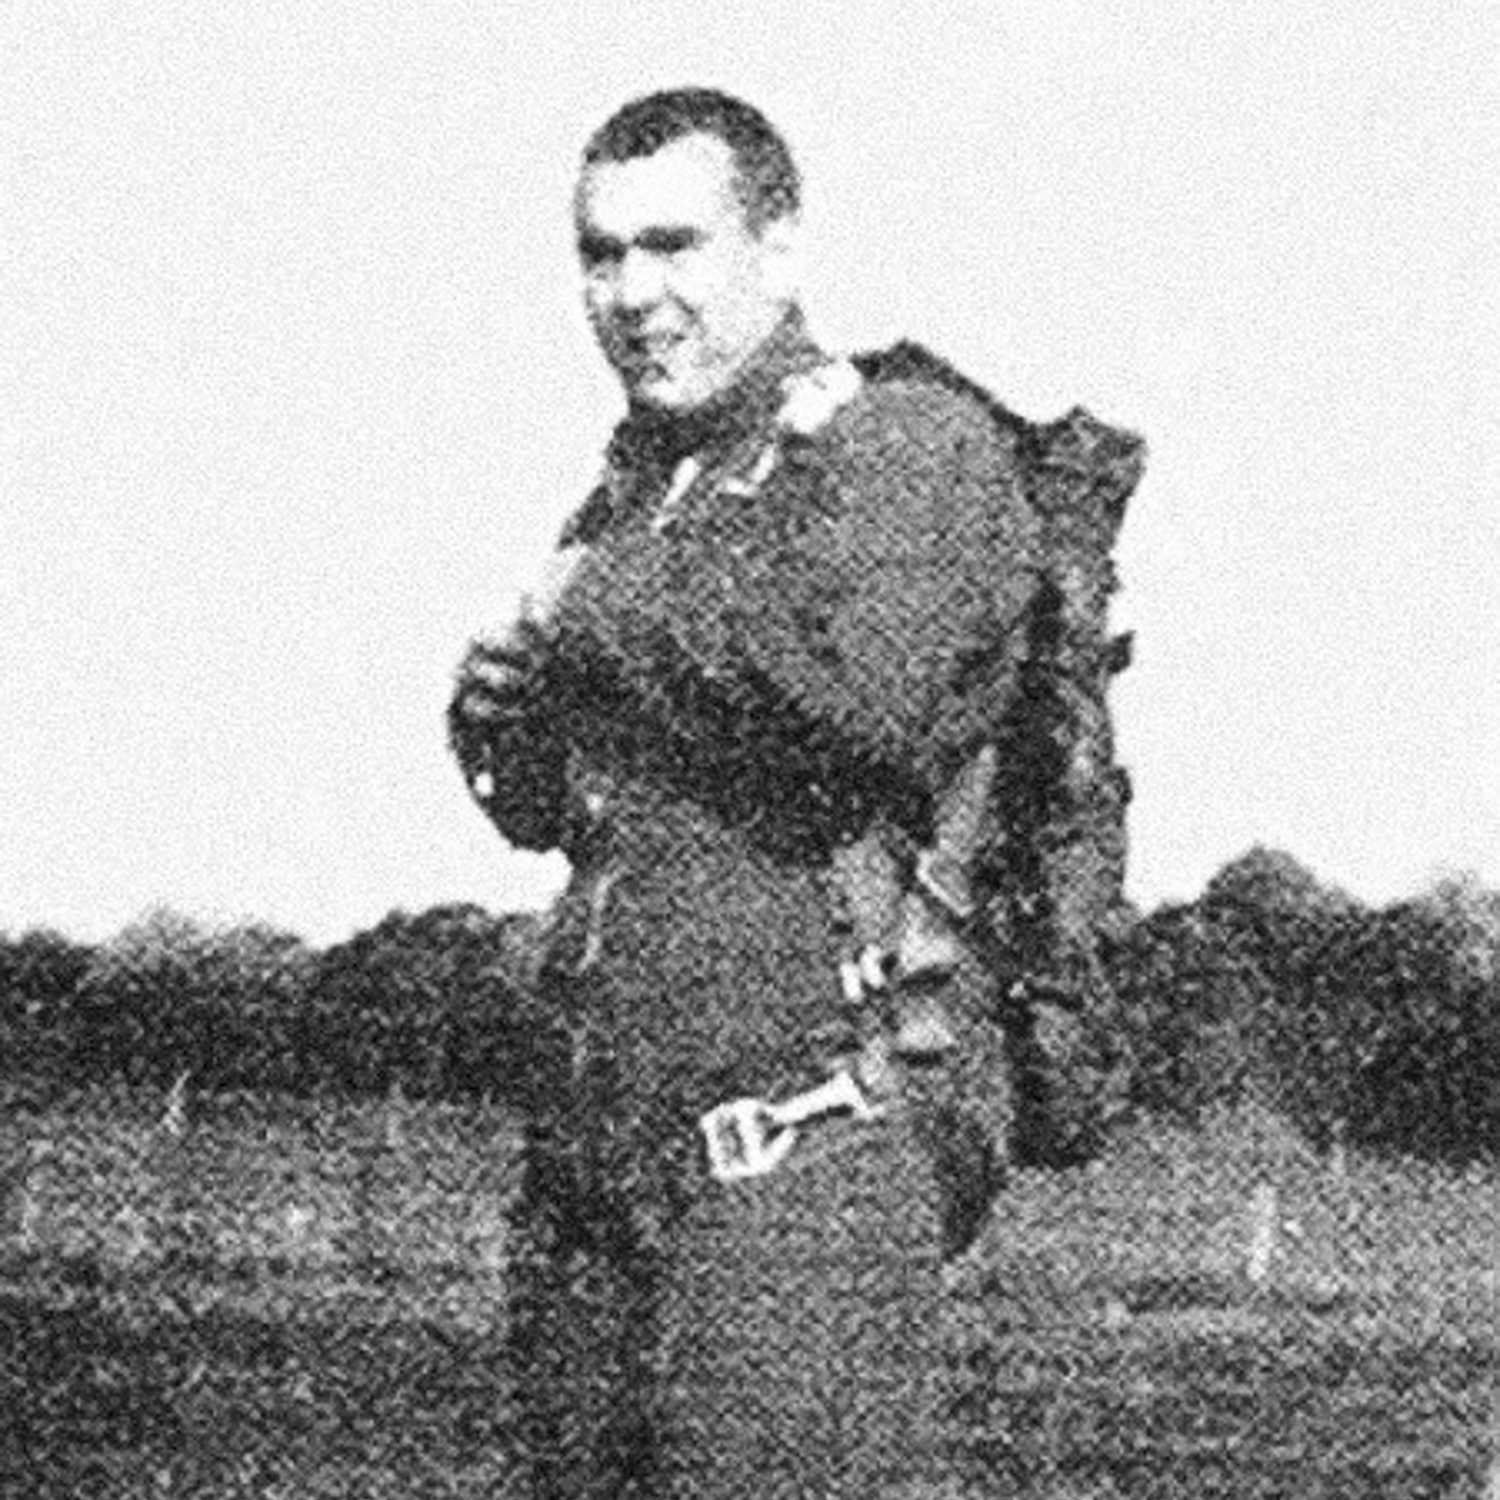 A faded black and white photograph of Michael A. Maloney standing in a field.